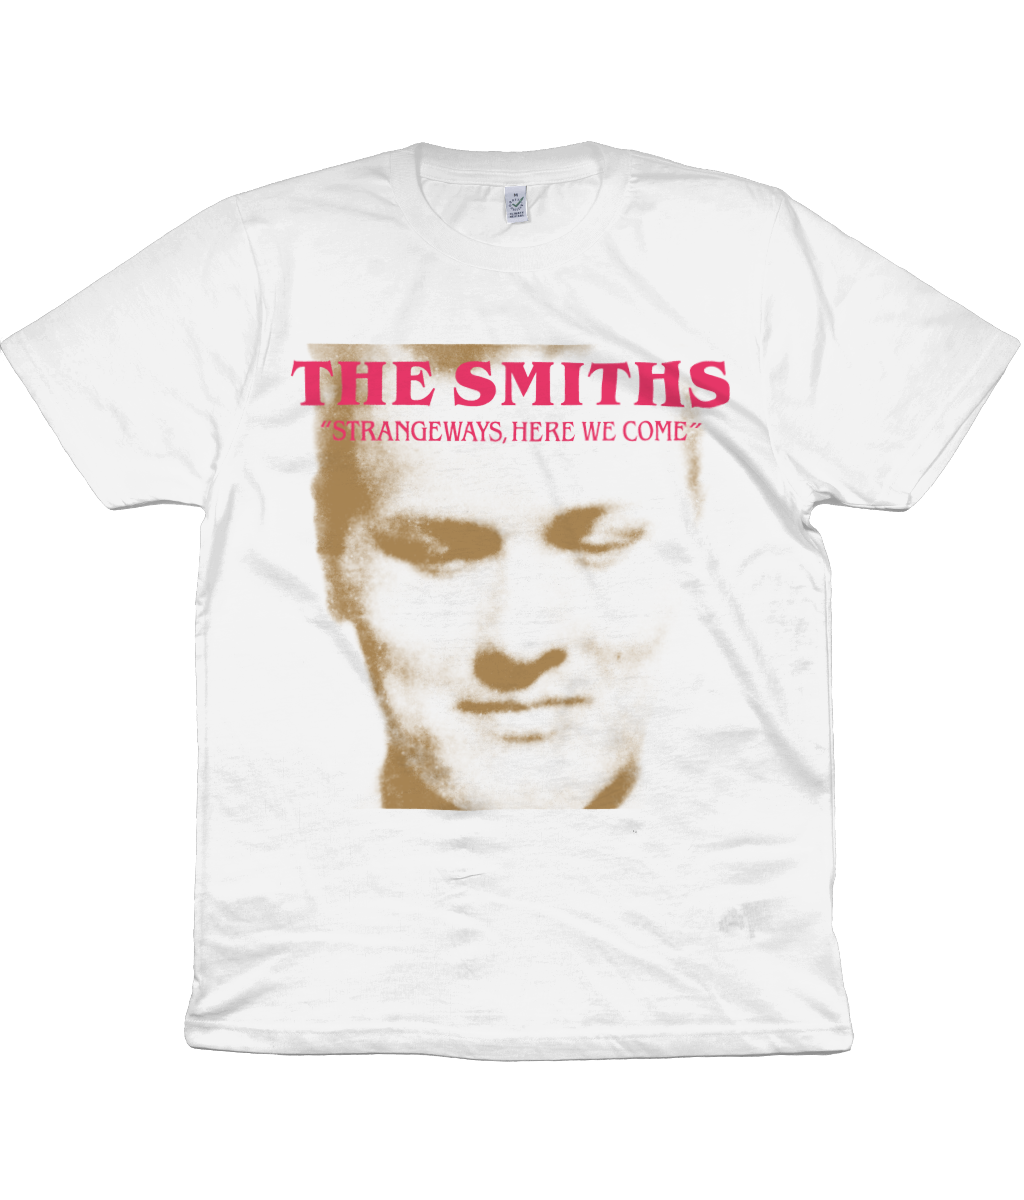 THE SMITHS - STRANGEWAYS, HERE WE COME - 2012 Promo - Pink & Brown - Front print